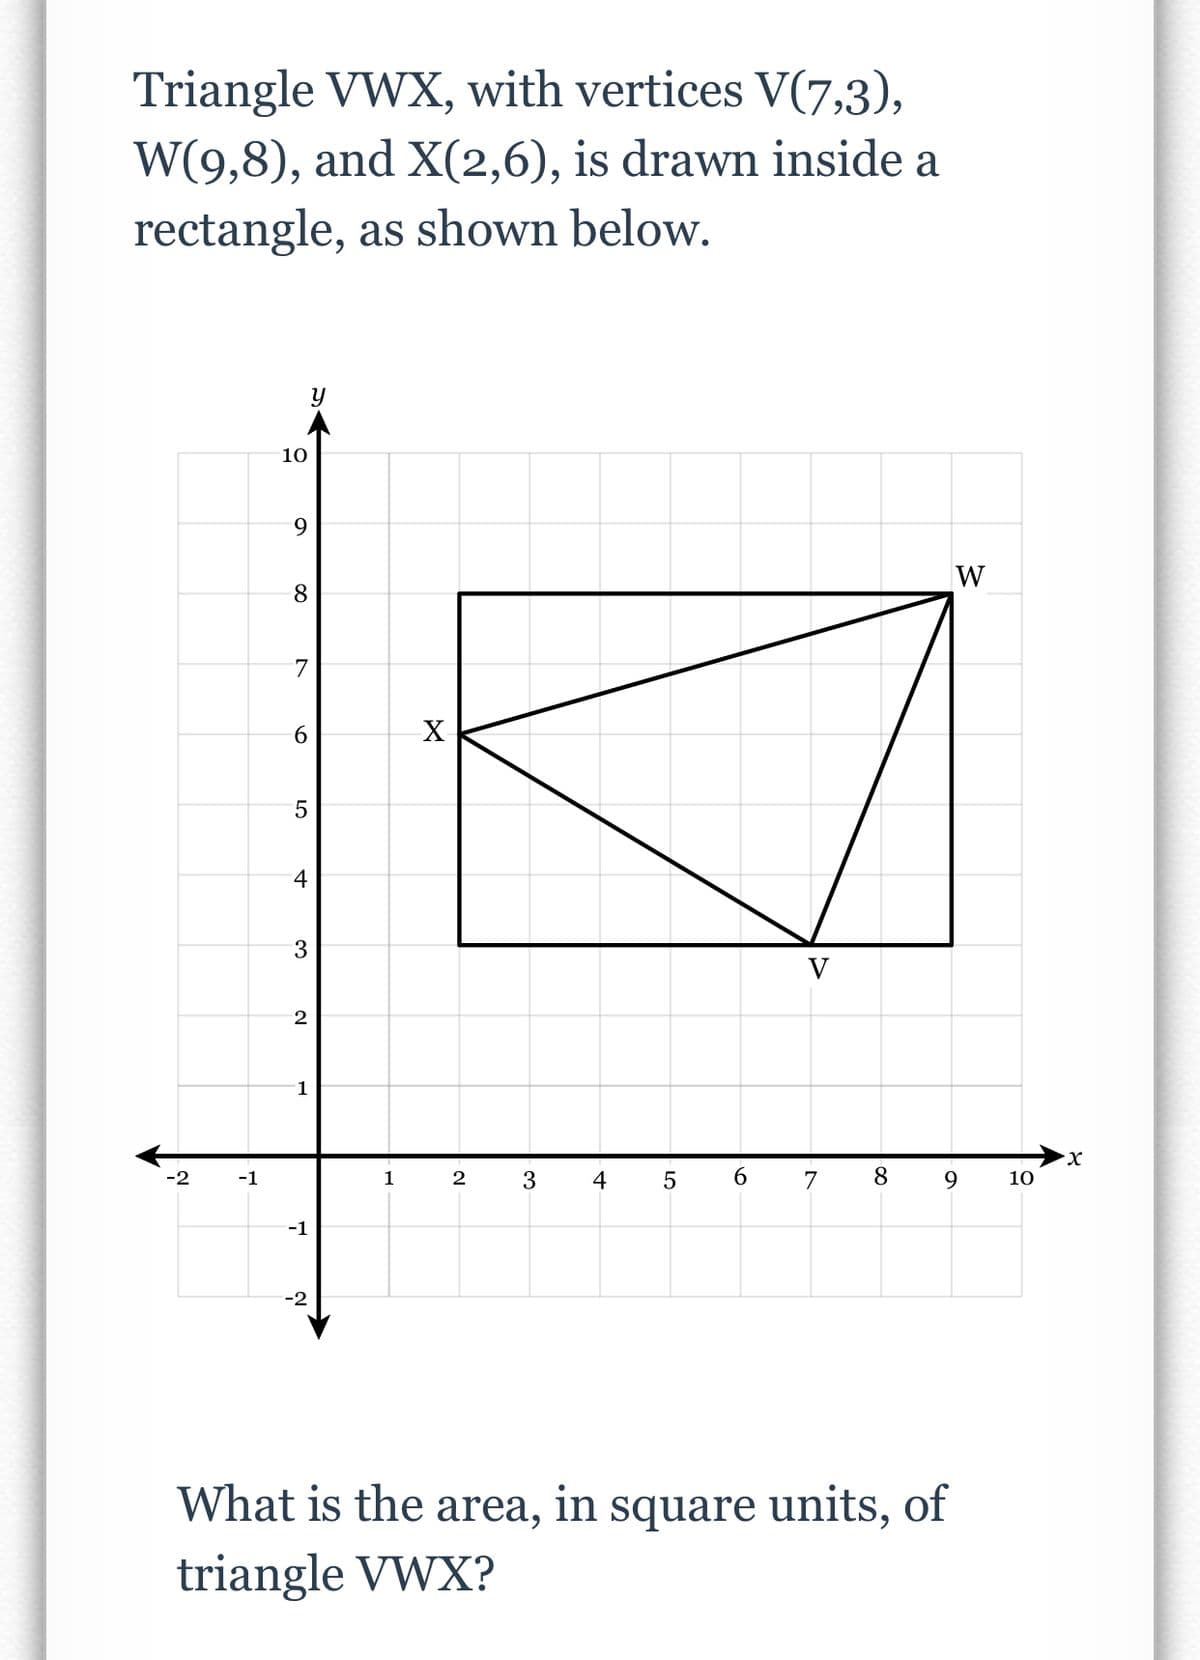 Triangle VWX, with vertices V(7,3),
W(9,8), and X(2,6), is drawn inside a
rectangle, as shown below.
10
9
W
8
X
4
V
2
1
-1
1
4
5
6.
7
8
9
10
-1
-2
What is the area, in square units, of
triangle VWX?
LO
6.
3.
